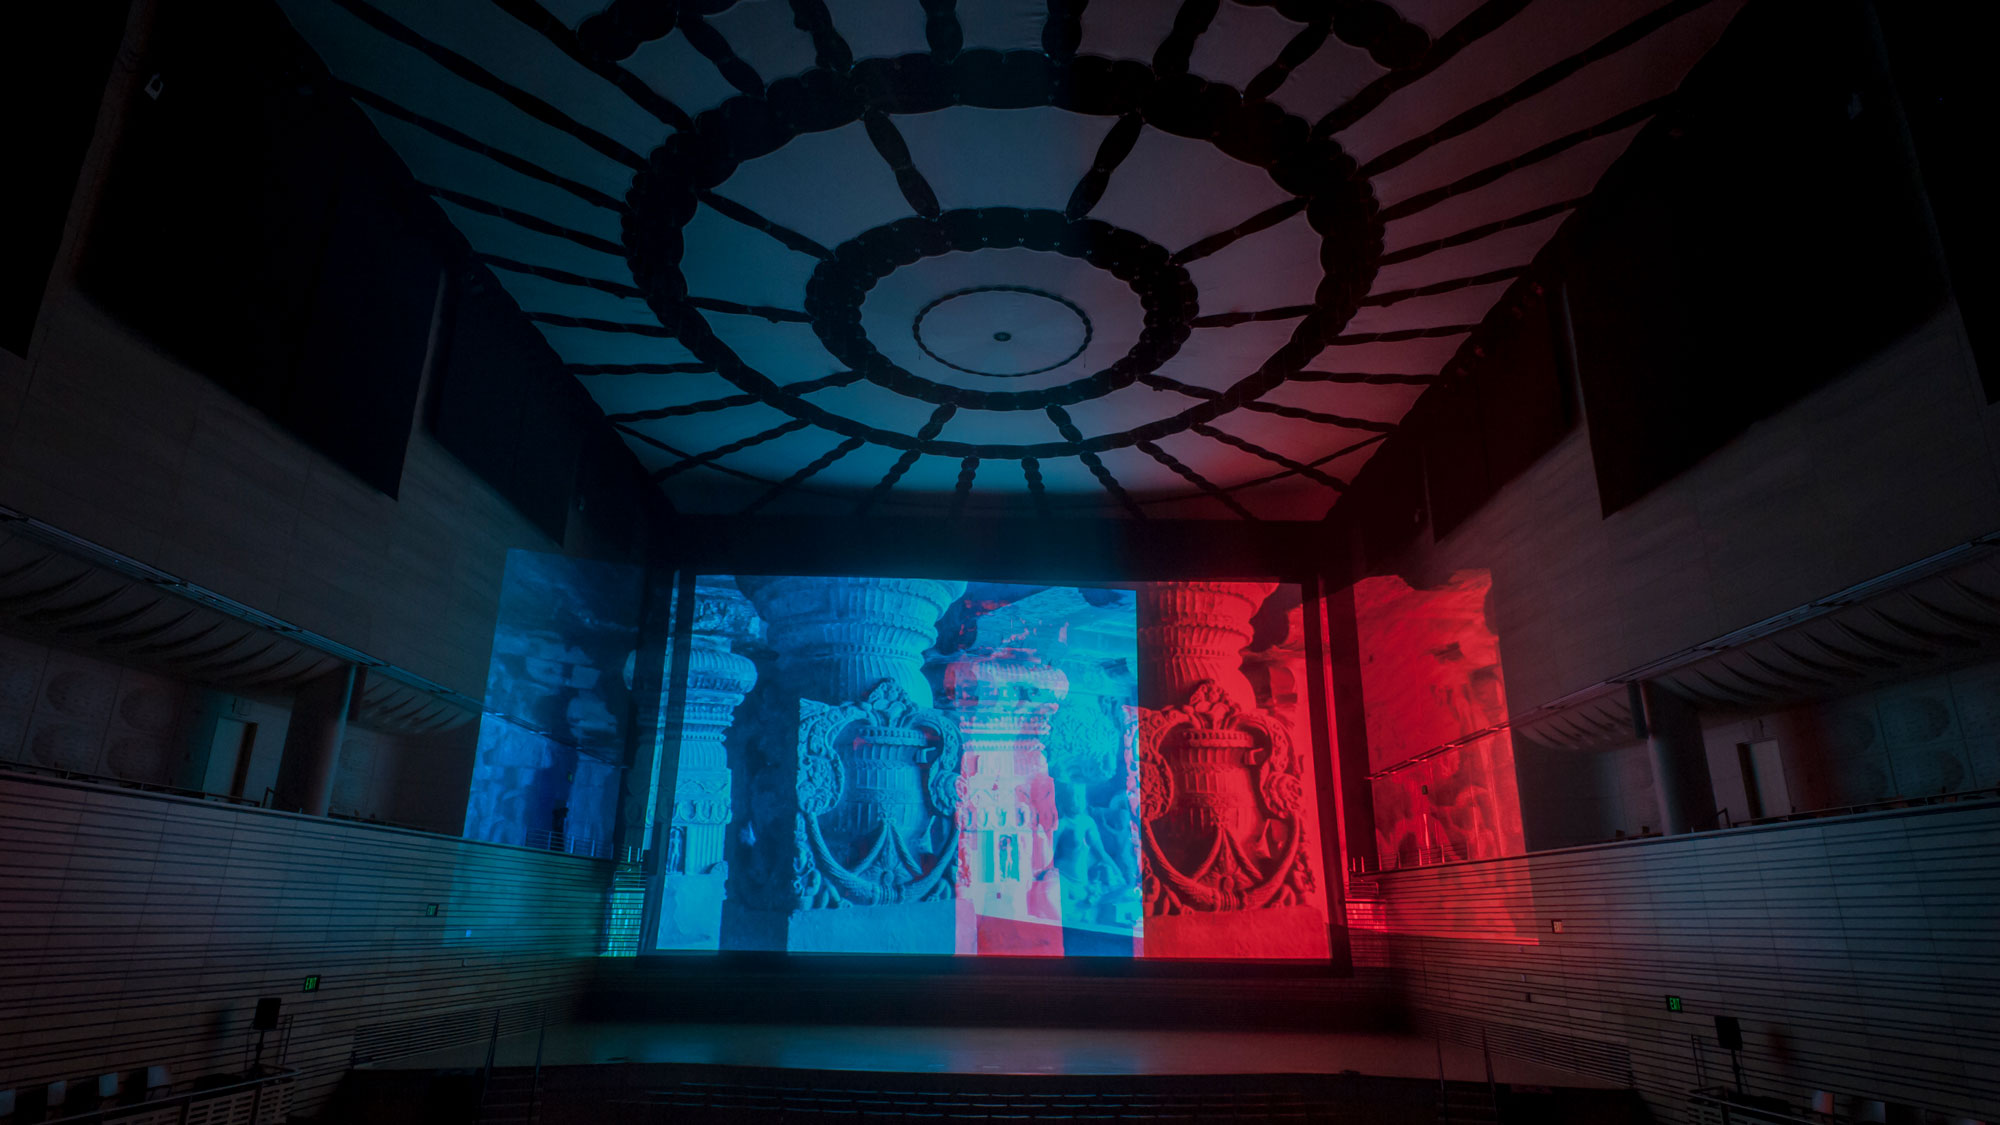 A projection of ornate classical/corinthian style columns in blue and red on the concert hall back wall. 